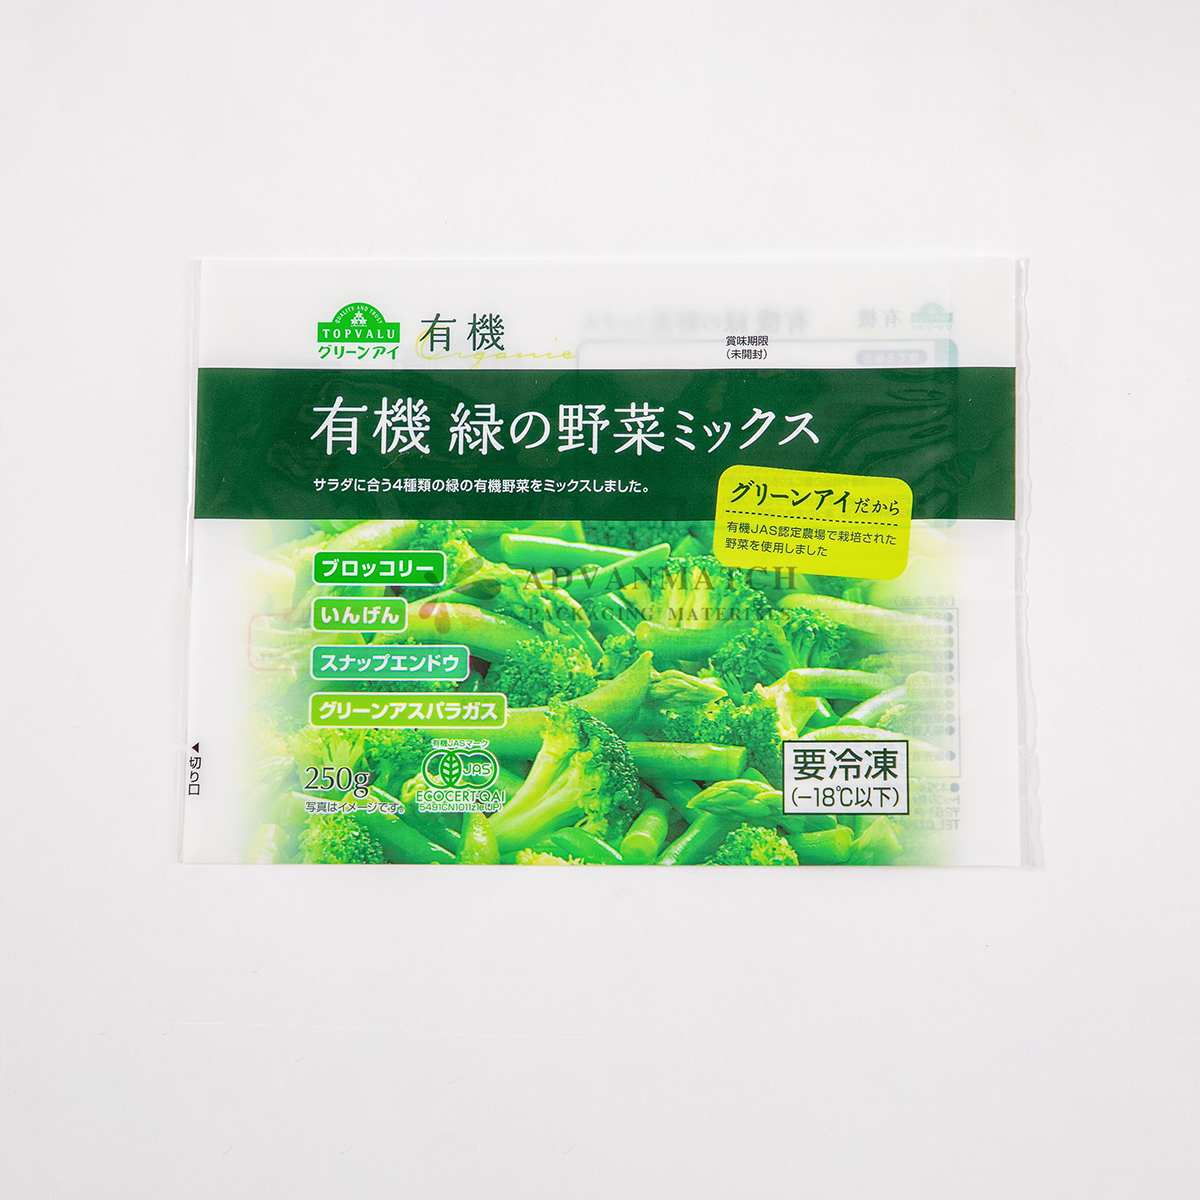 Microwavable pouch Featured Umfanekiso